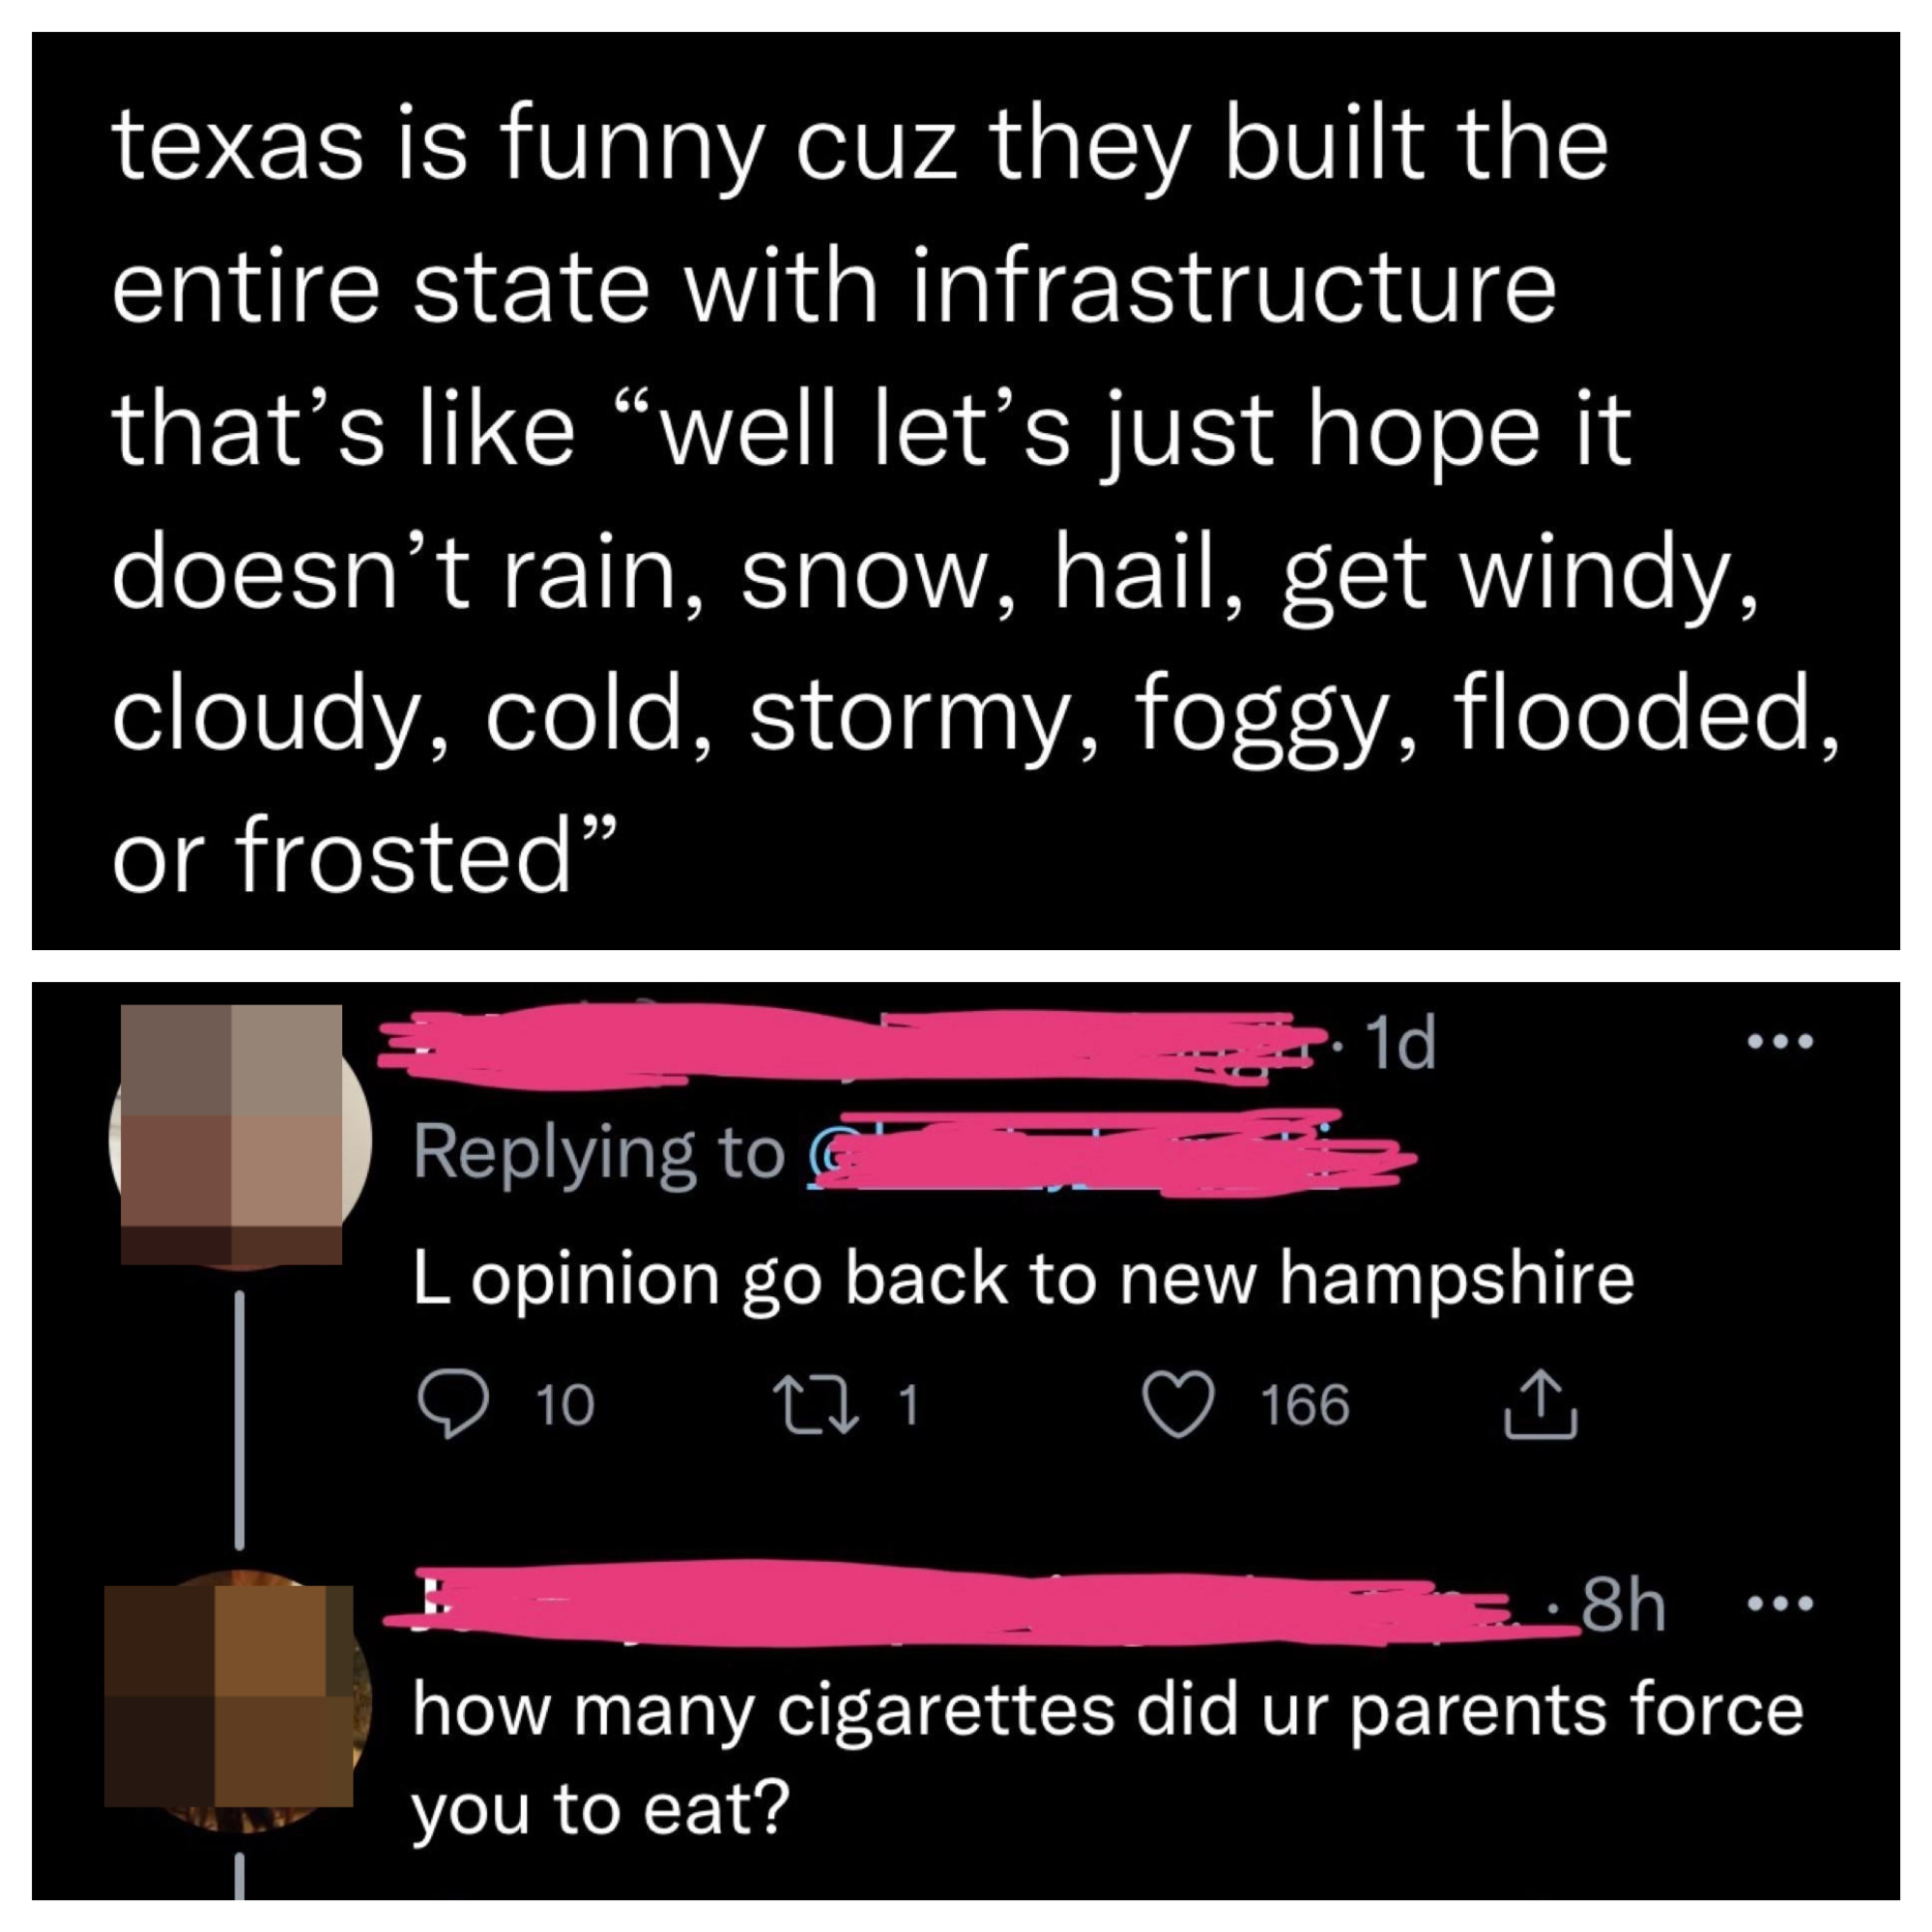 &quot;They built Texas with infrastructure that&#x27;s like &#x27;let&#x27;s hope it doesn&#x27;t rain, snow, hail, get windy, stormy,&quot; and other weather; when someone responds, &quot;L opinion go back to New Hampshire,&quot; they get, &quot;how many cigarettes did ur parents force you to eat?&quot;